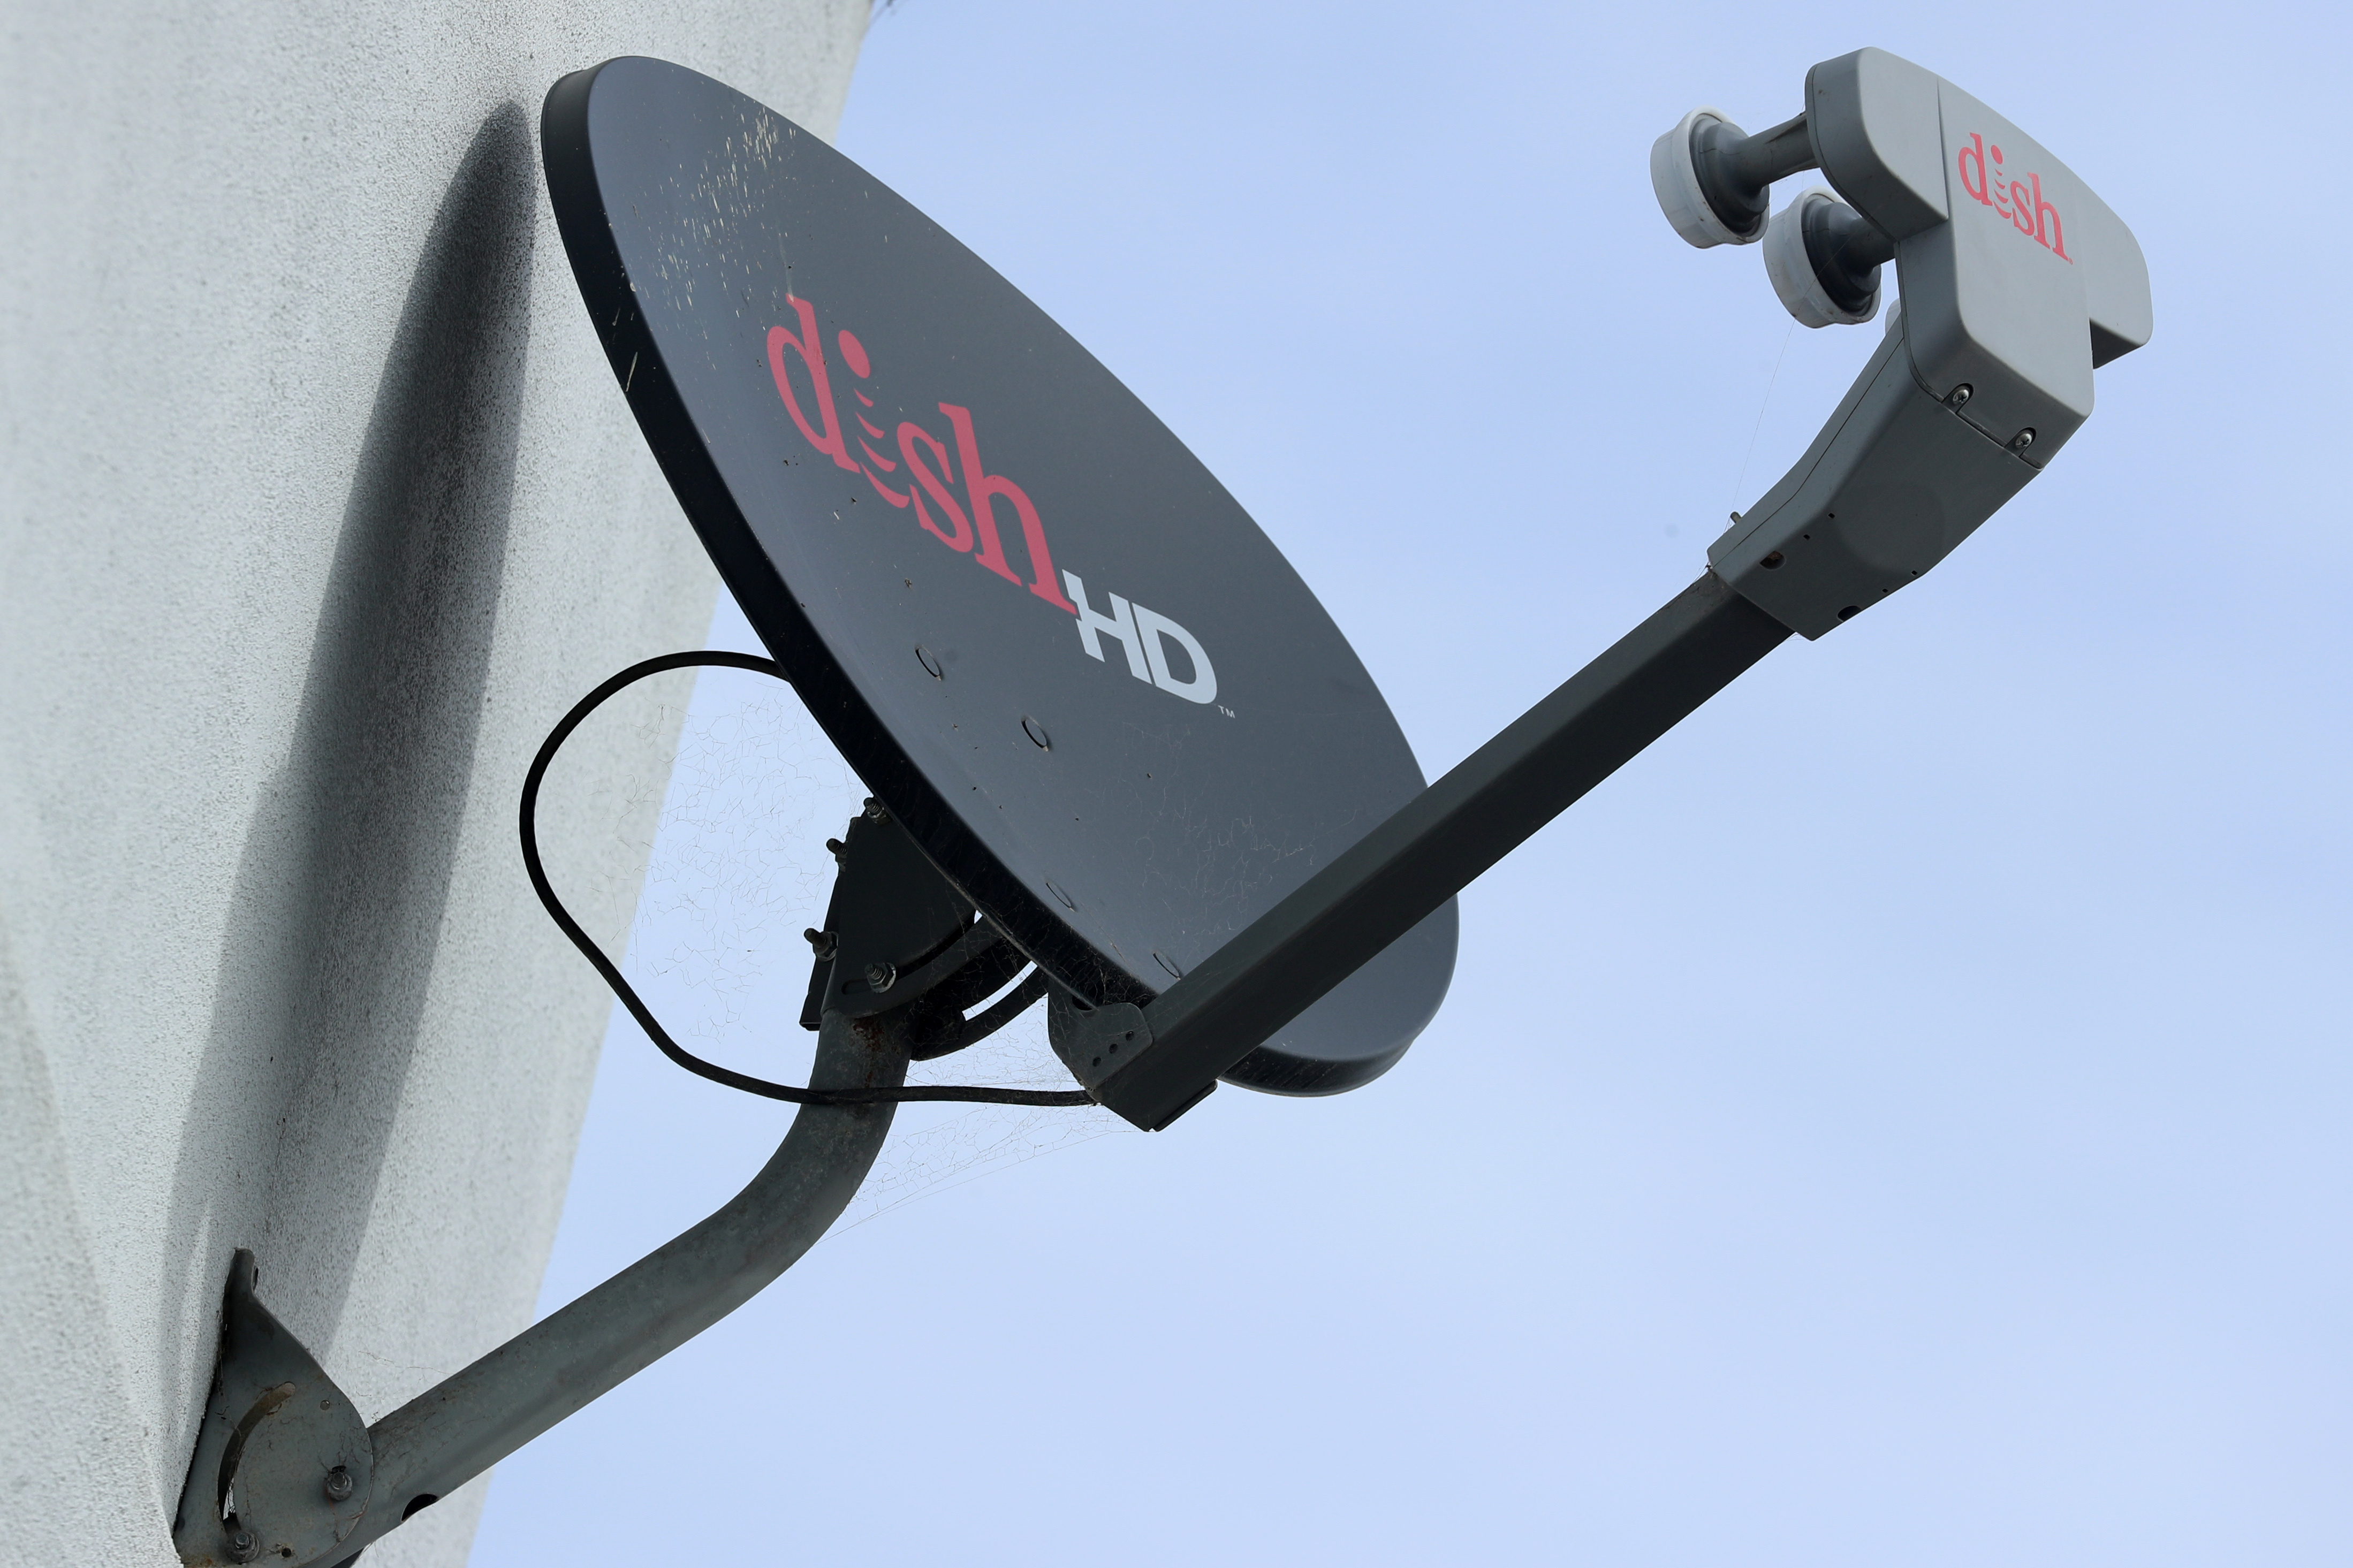 Dish Network suffers multi-day customer service and website outage